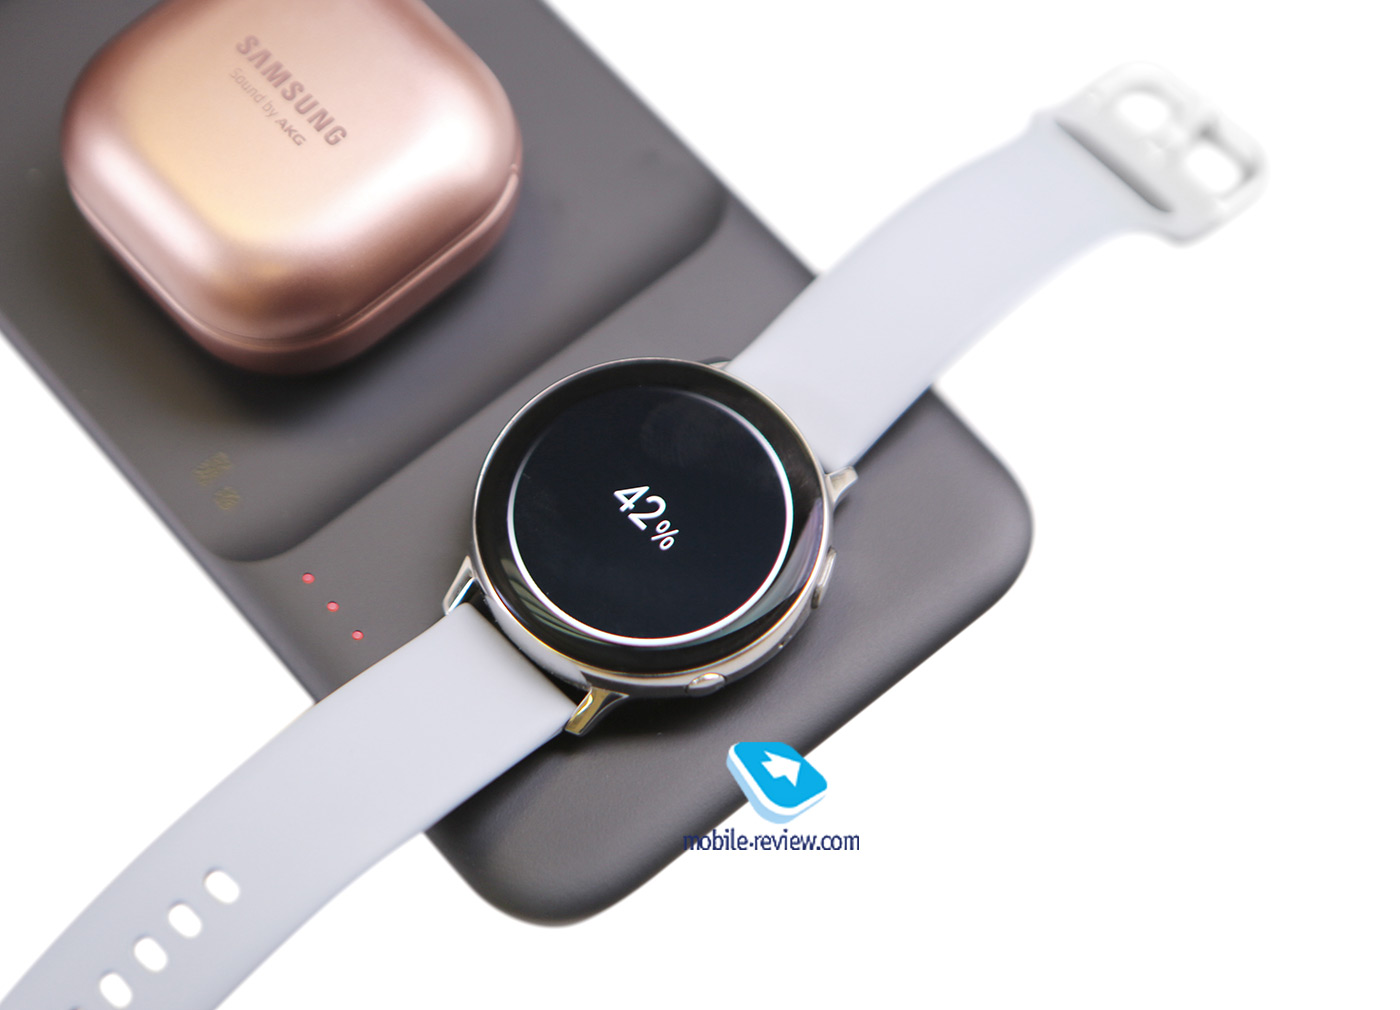 Buyer's guide. Choosing a smartwatch for the 2020-2021 season